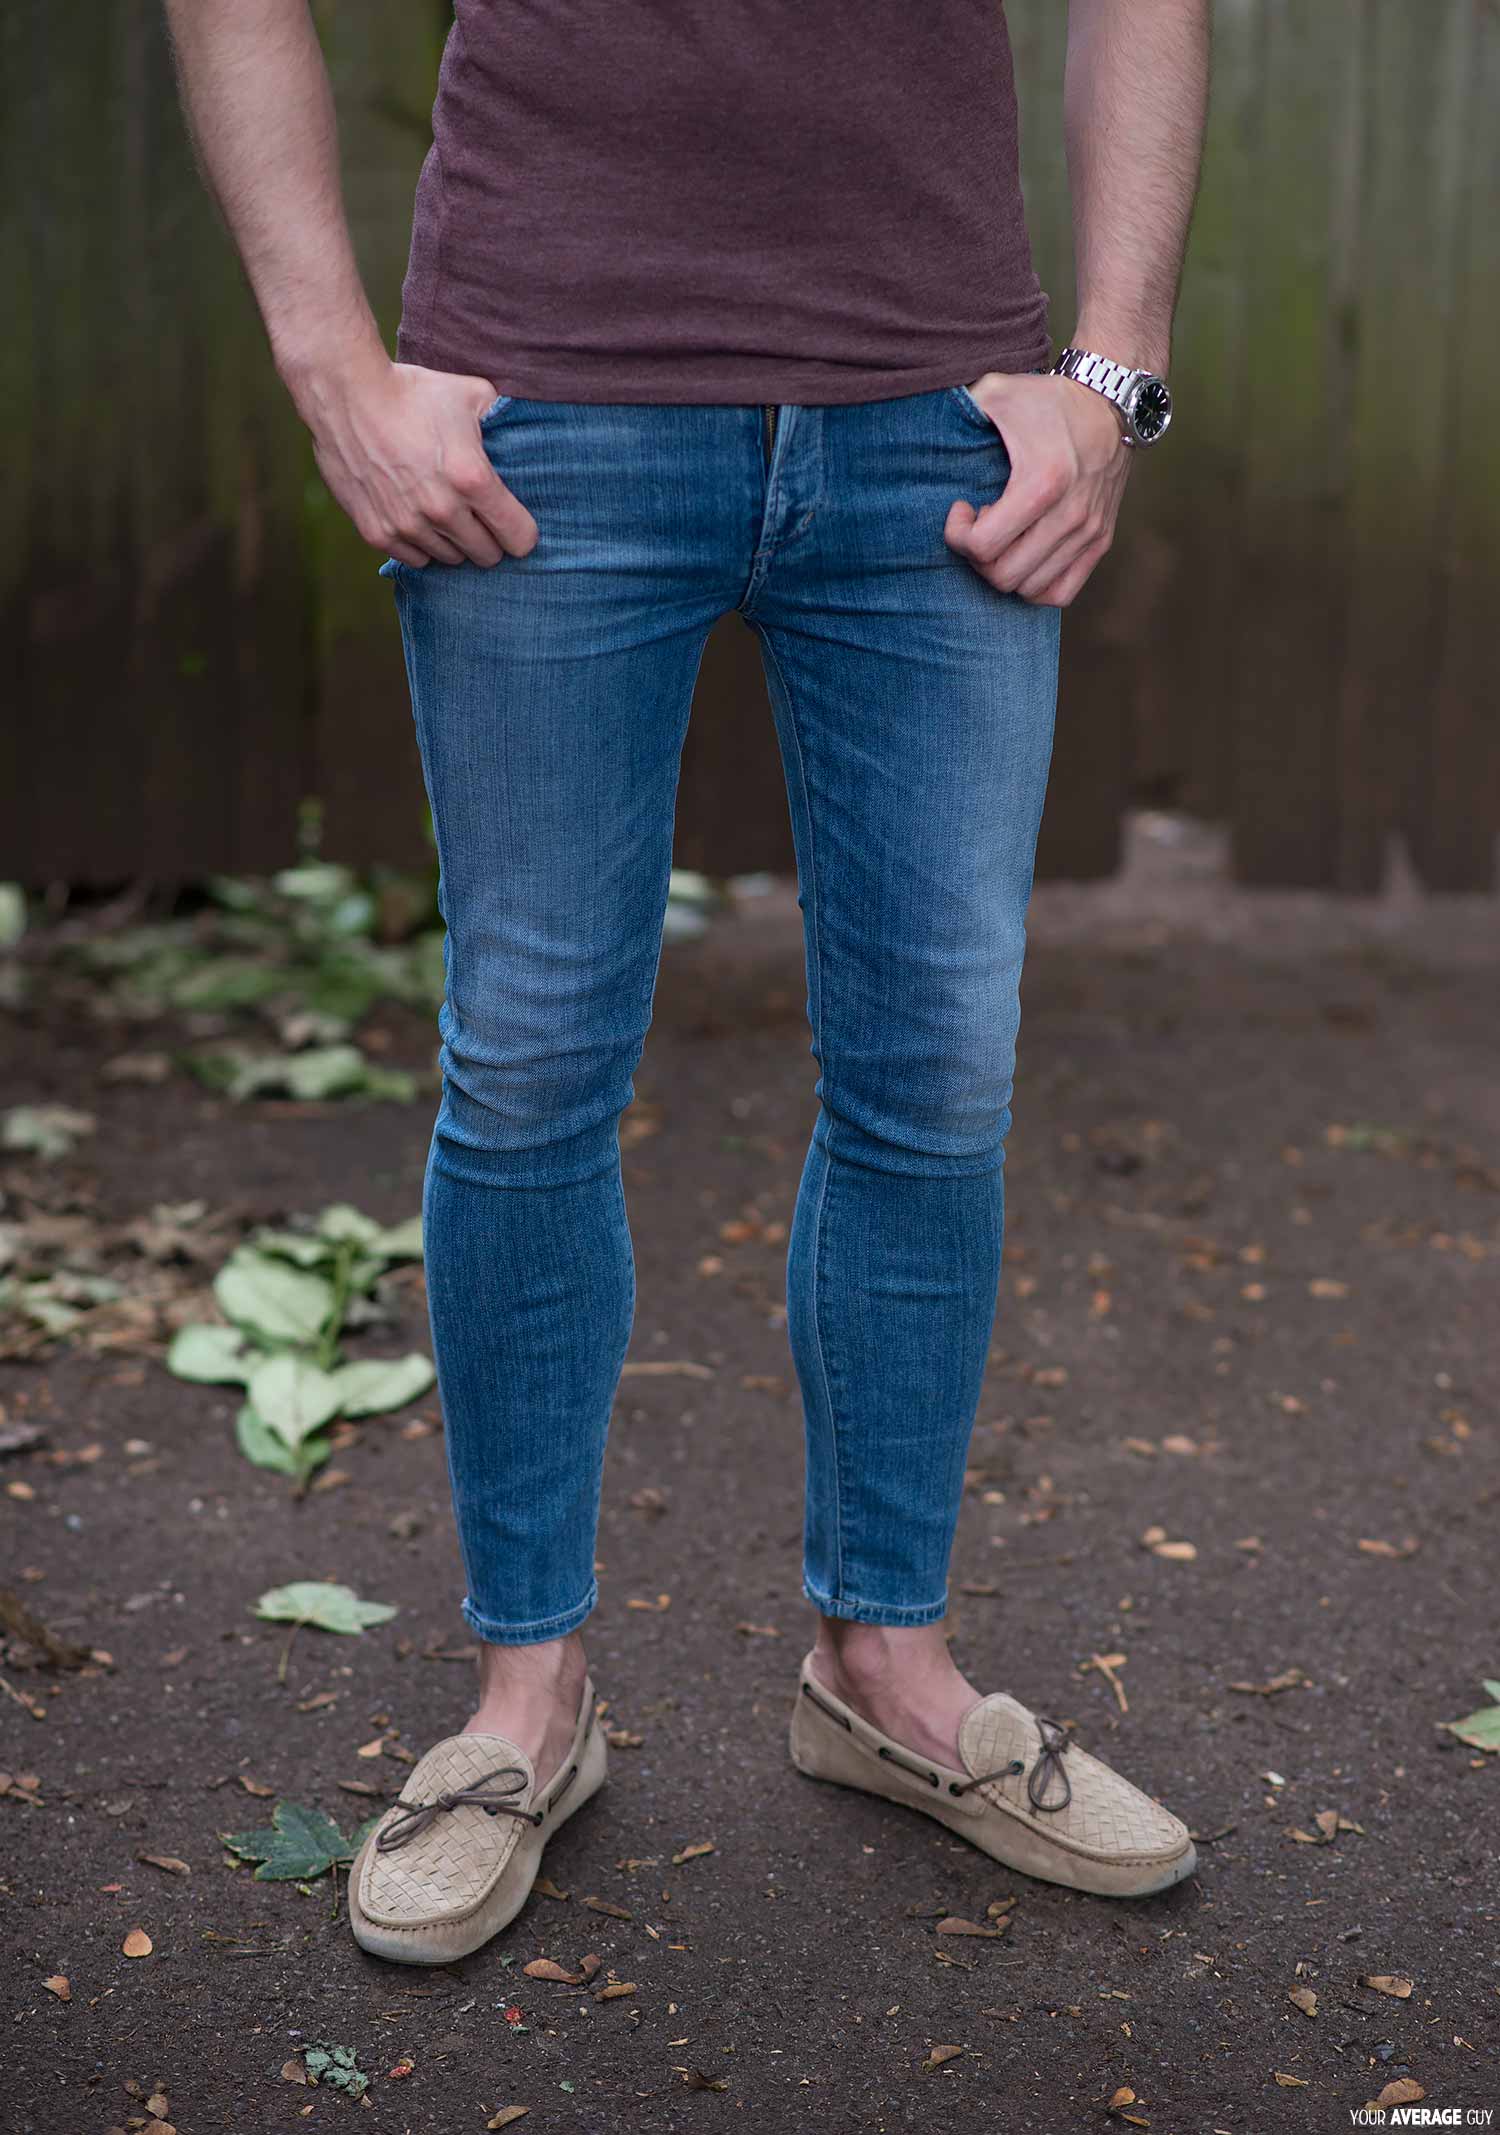 womens-skinny-jeans-on-a-man-your-average-guy